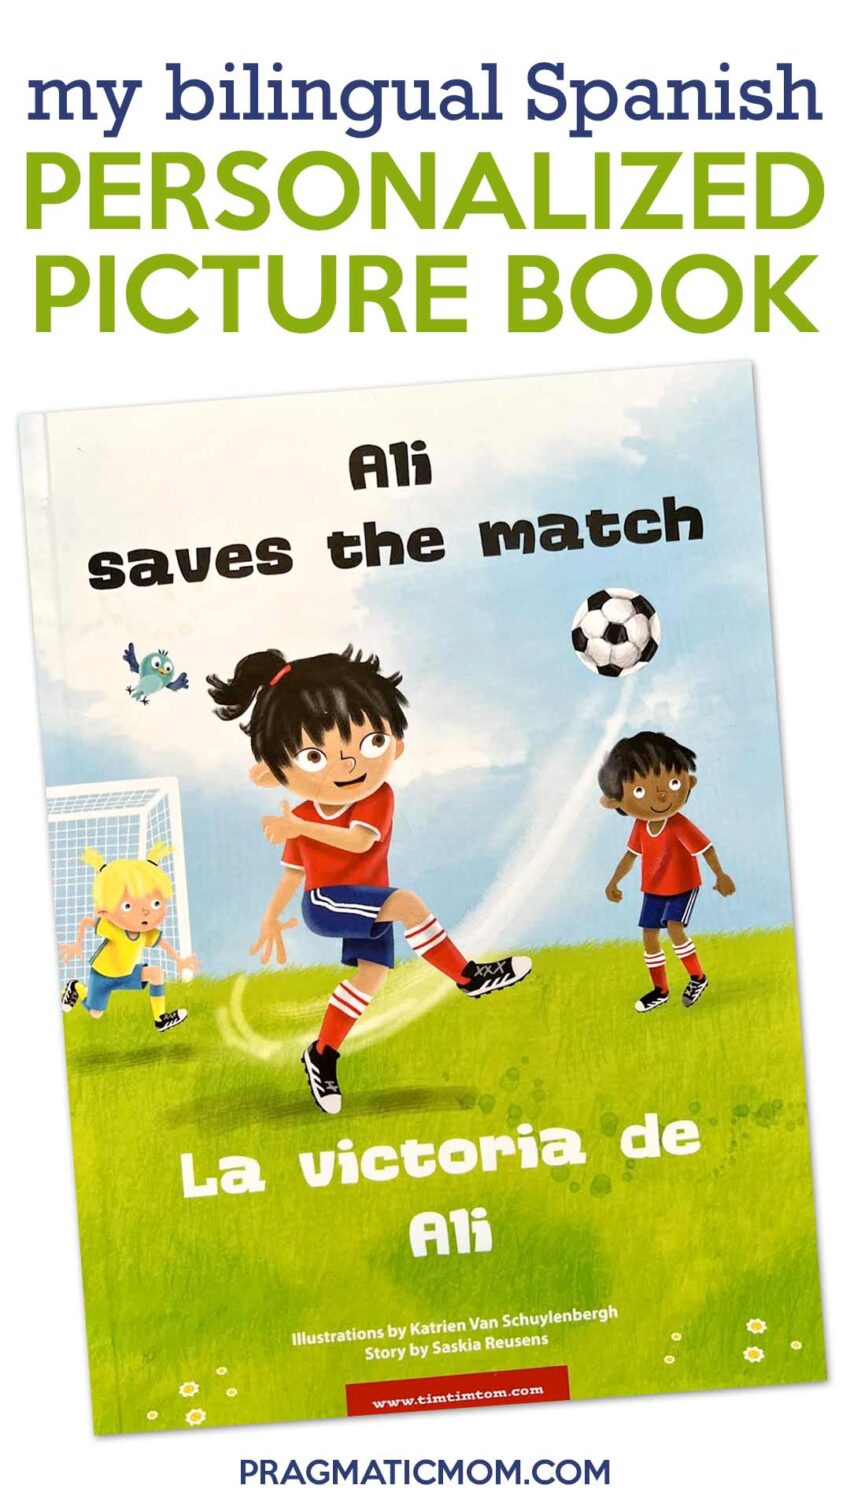 My Bilingual Spanish TimTimTom Personalized Picture Book!